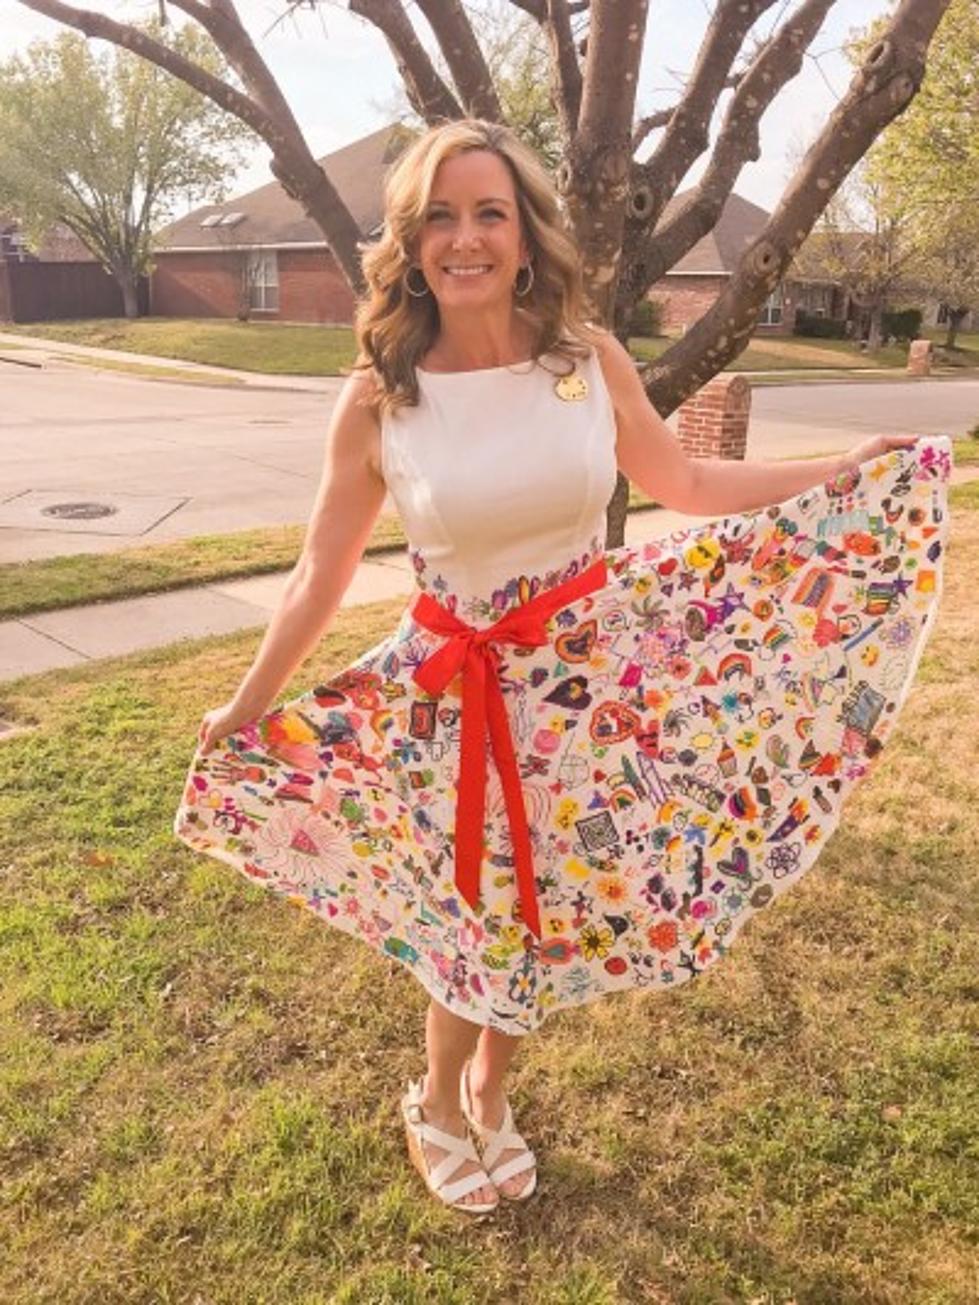 A Texas Teacher Lets Students Doodle On Her Clothes And It Works